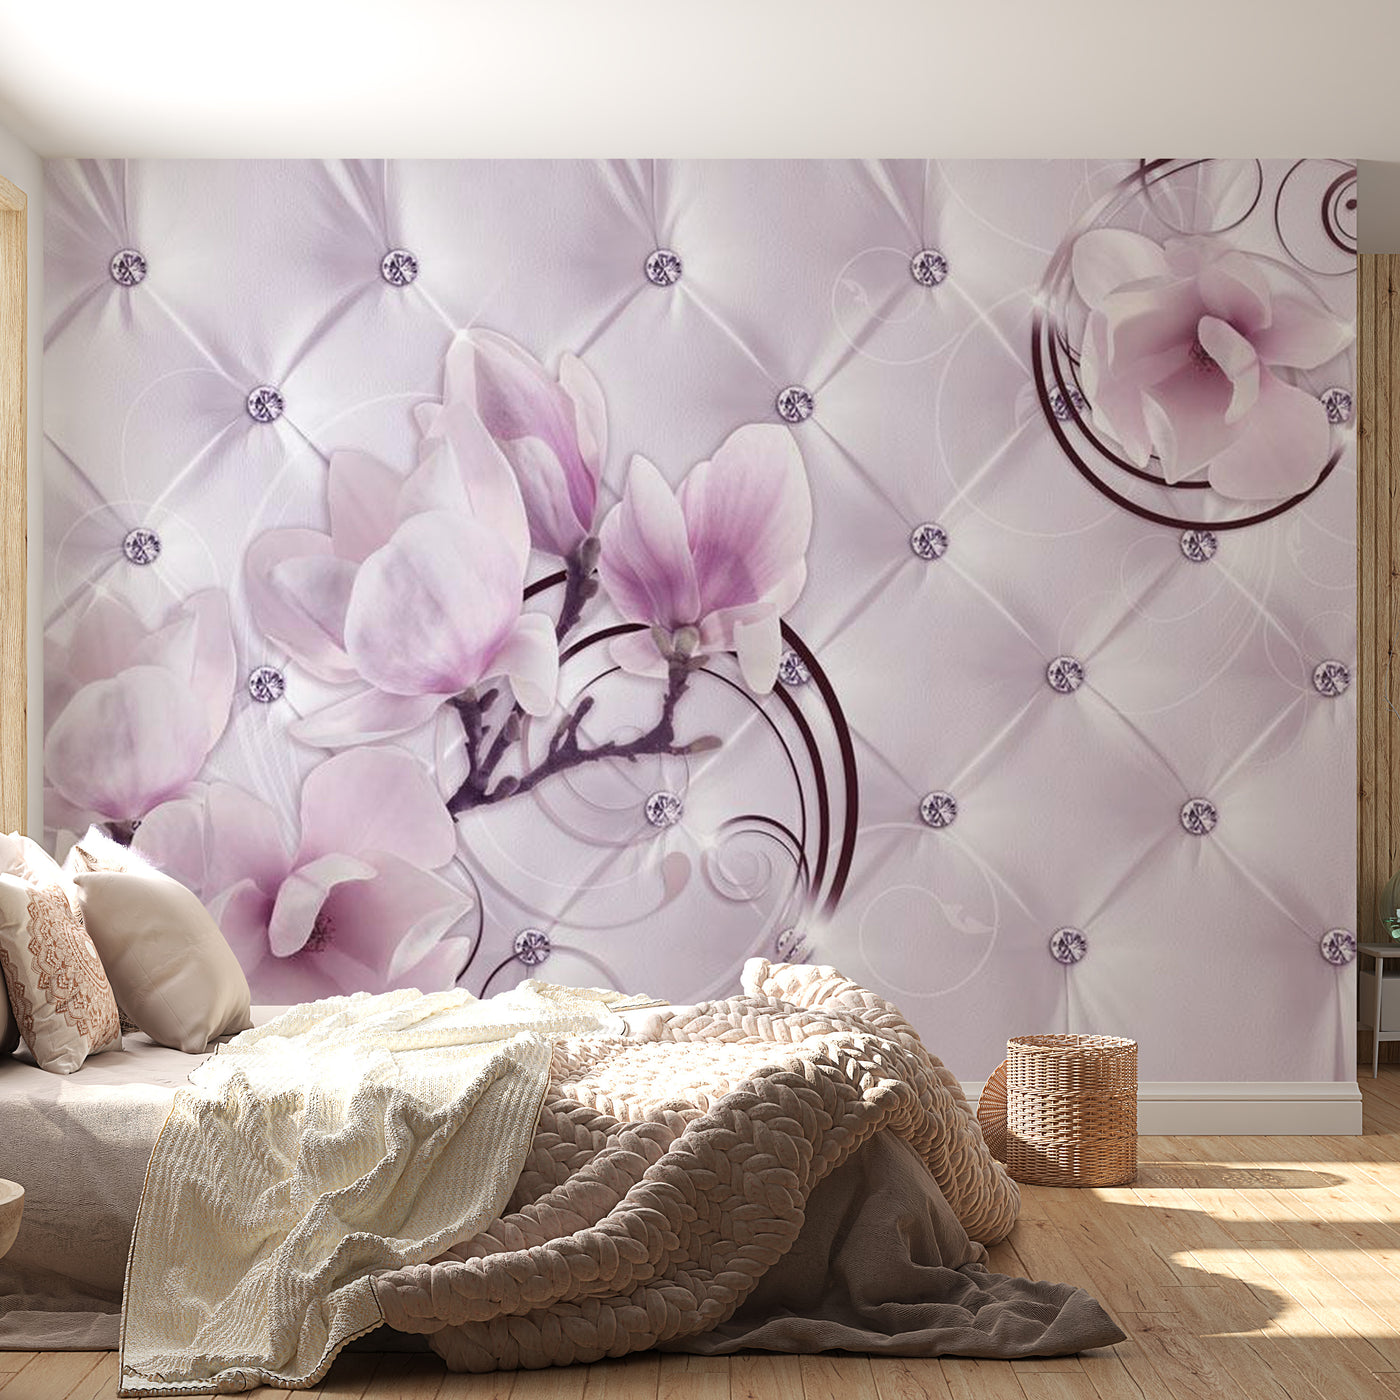 Peel & Stick Floral Wall Mural - Sweet Elegance - Removable Wall Decals